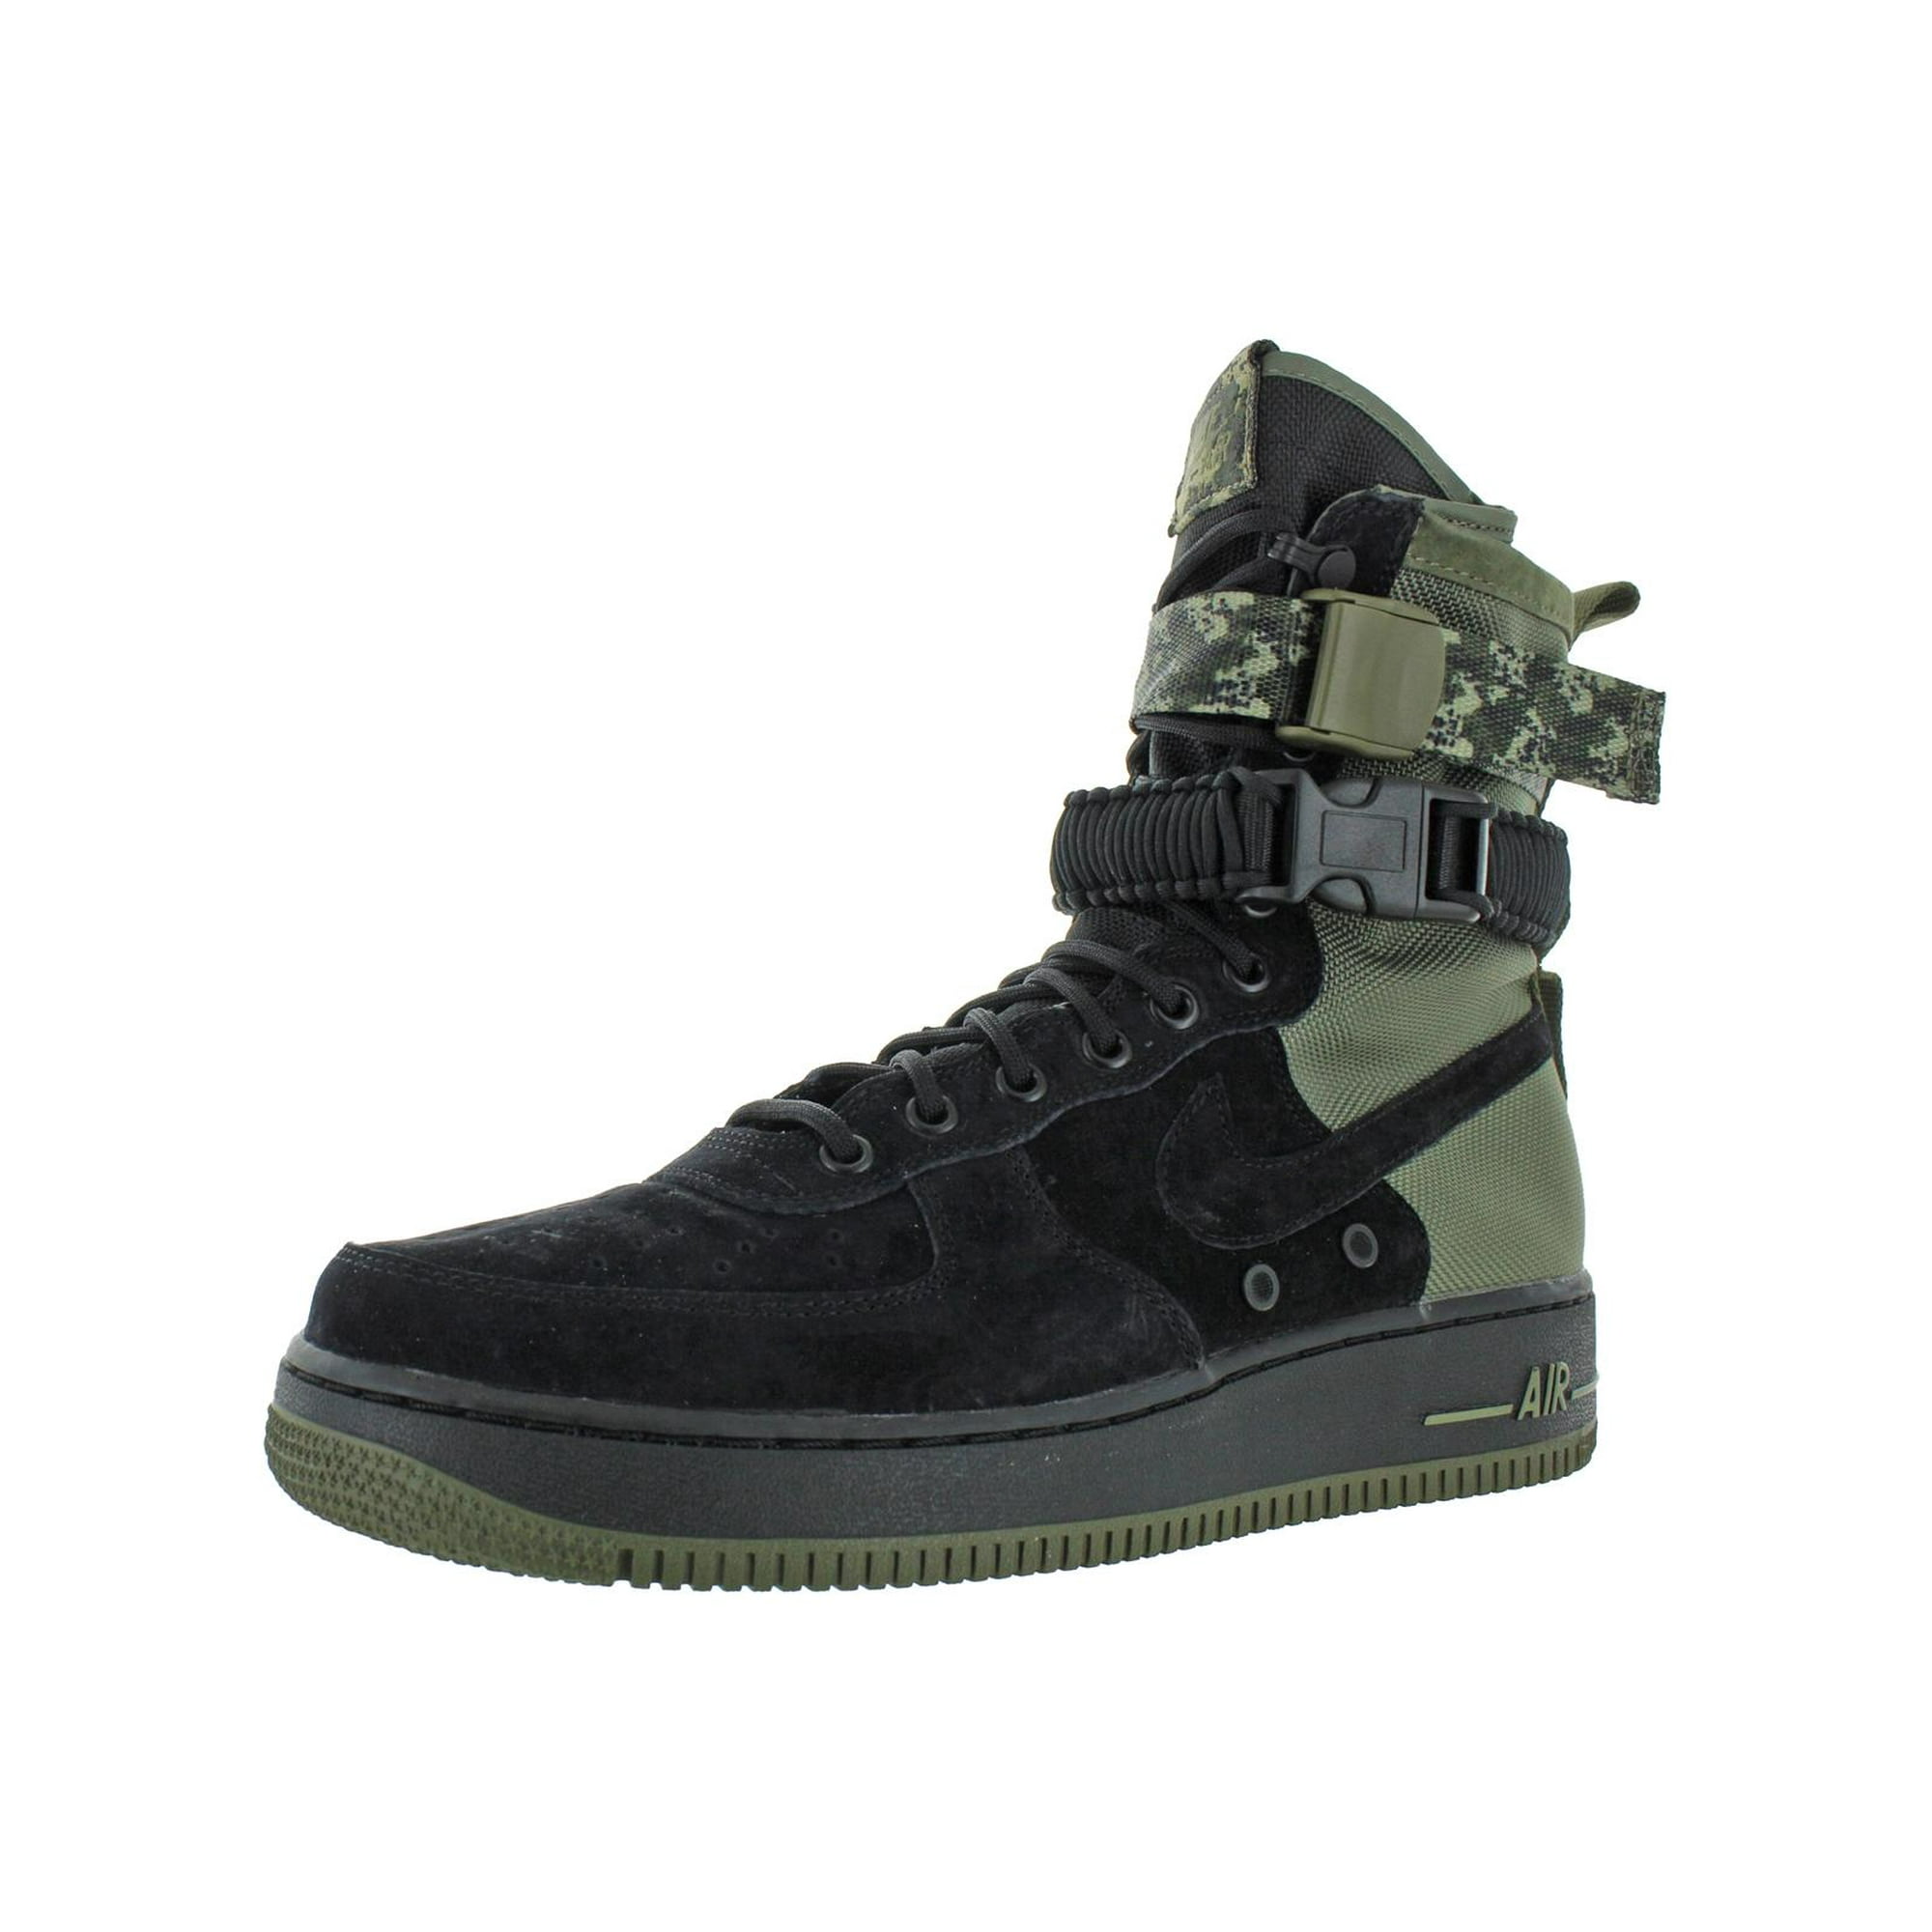 Nike Men's Sf Air Force 1 Black / Olive Mid-Calf Leather - 9.5M -